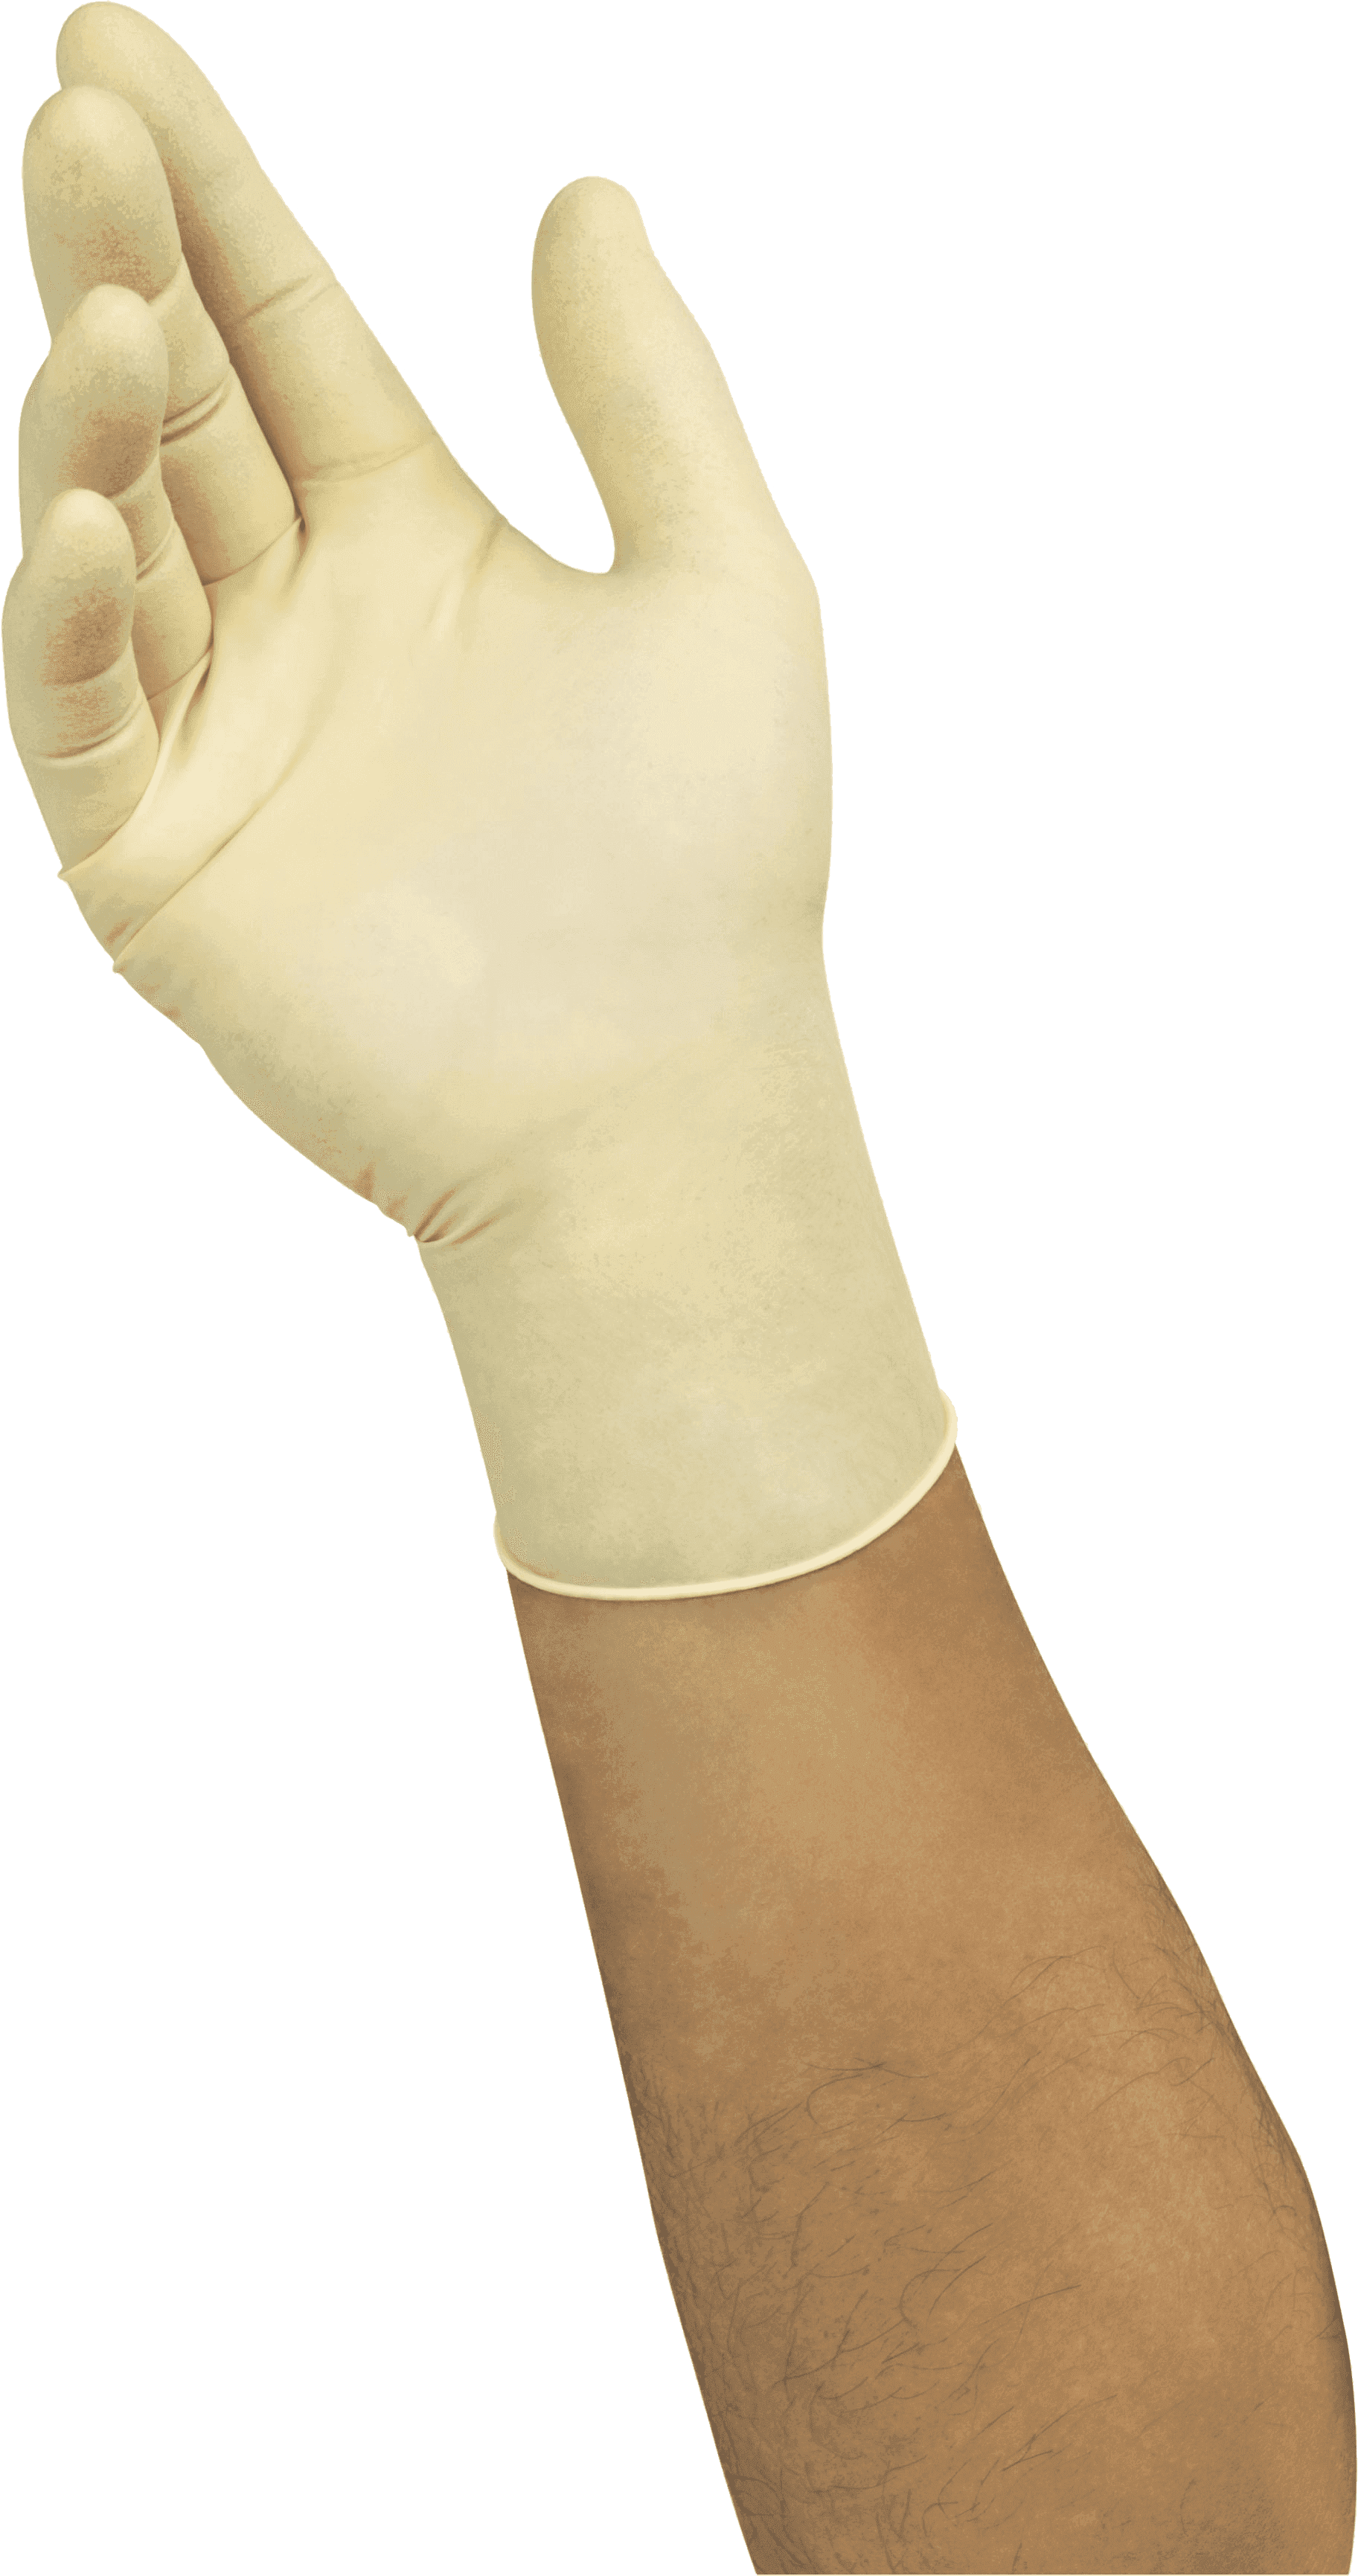 Microflex 63-864 Disposable Latex Gloves - Box of 100 units